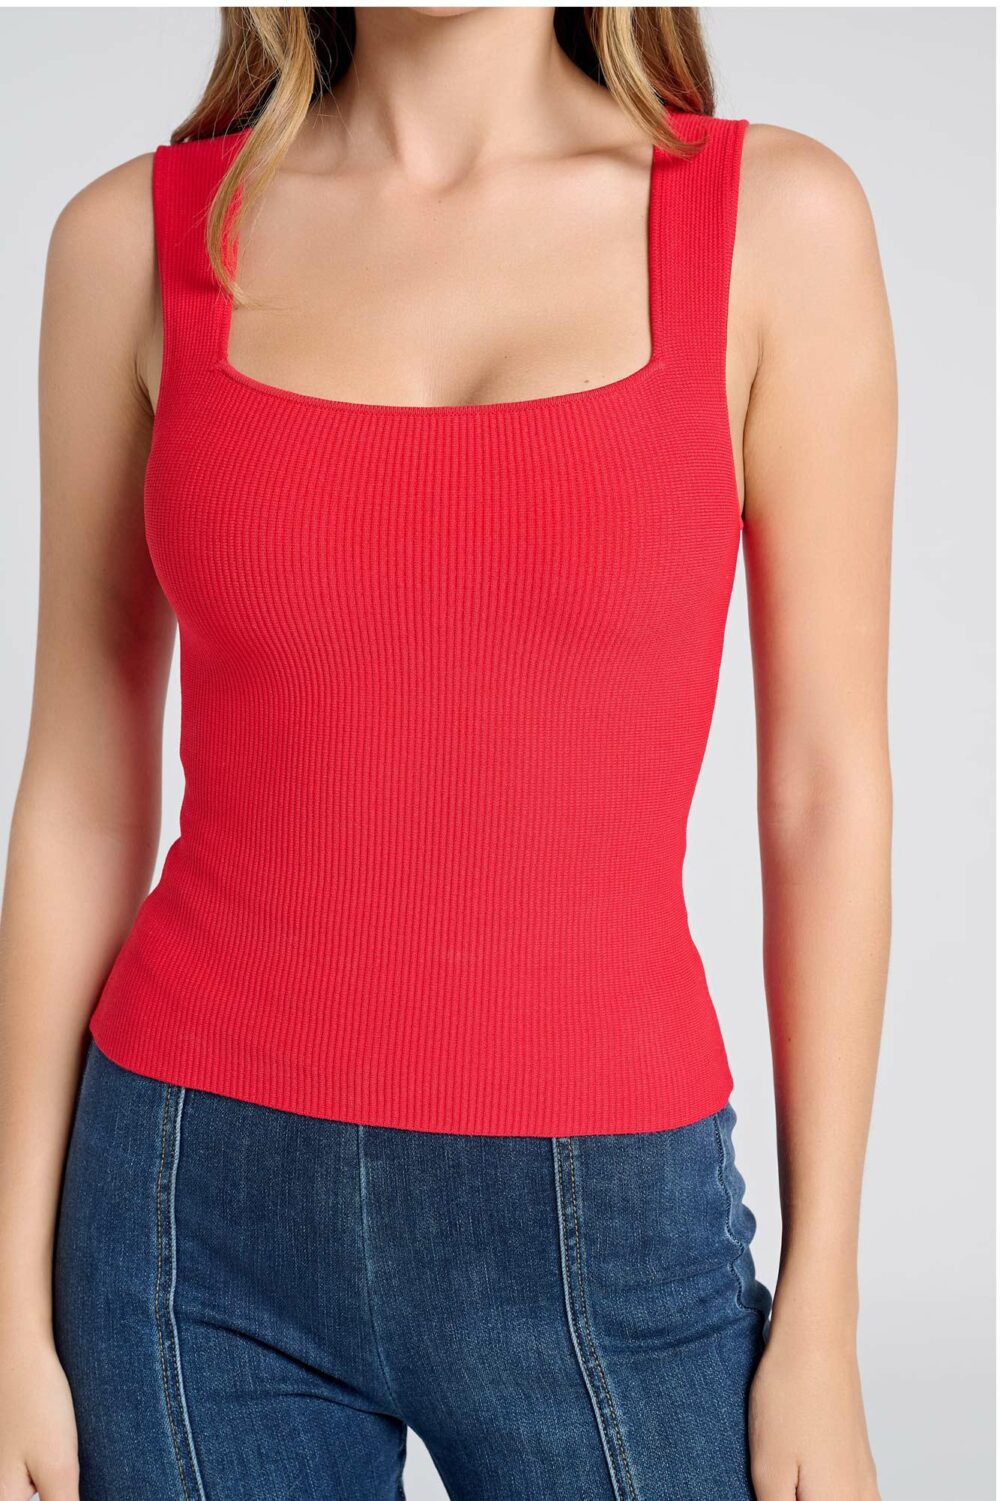 Ladies Top Colour is Red